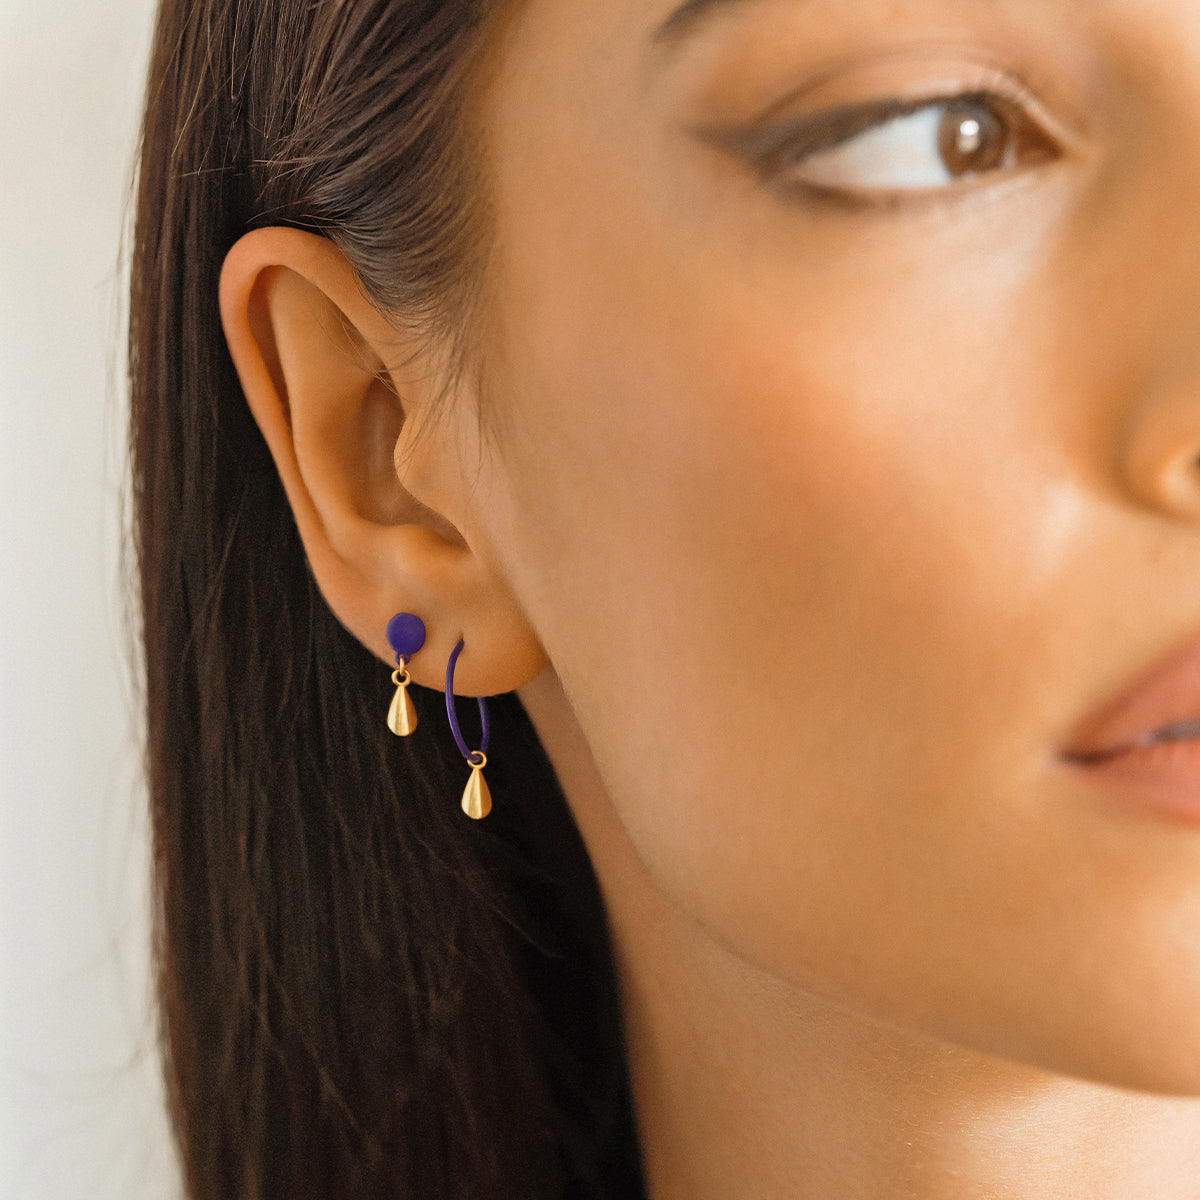 Earrings - Single earring with Drop and painted button - ORO18KT - 3 | Rue des Mille